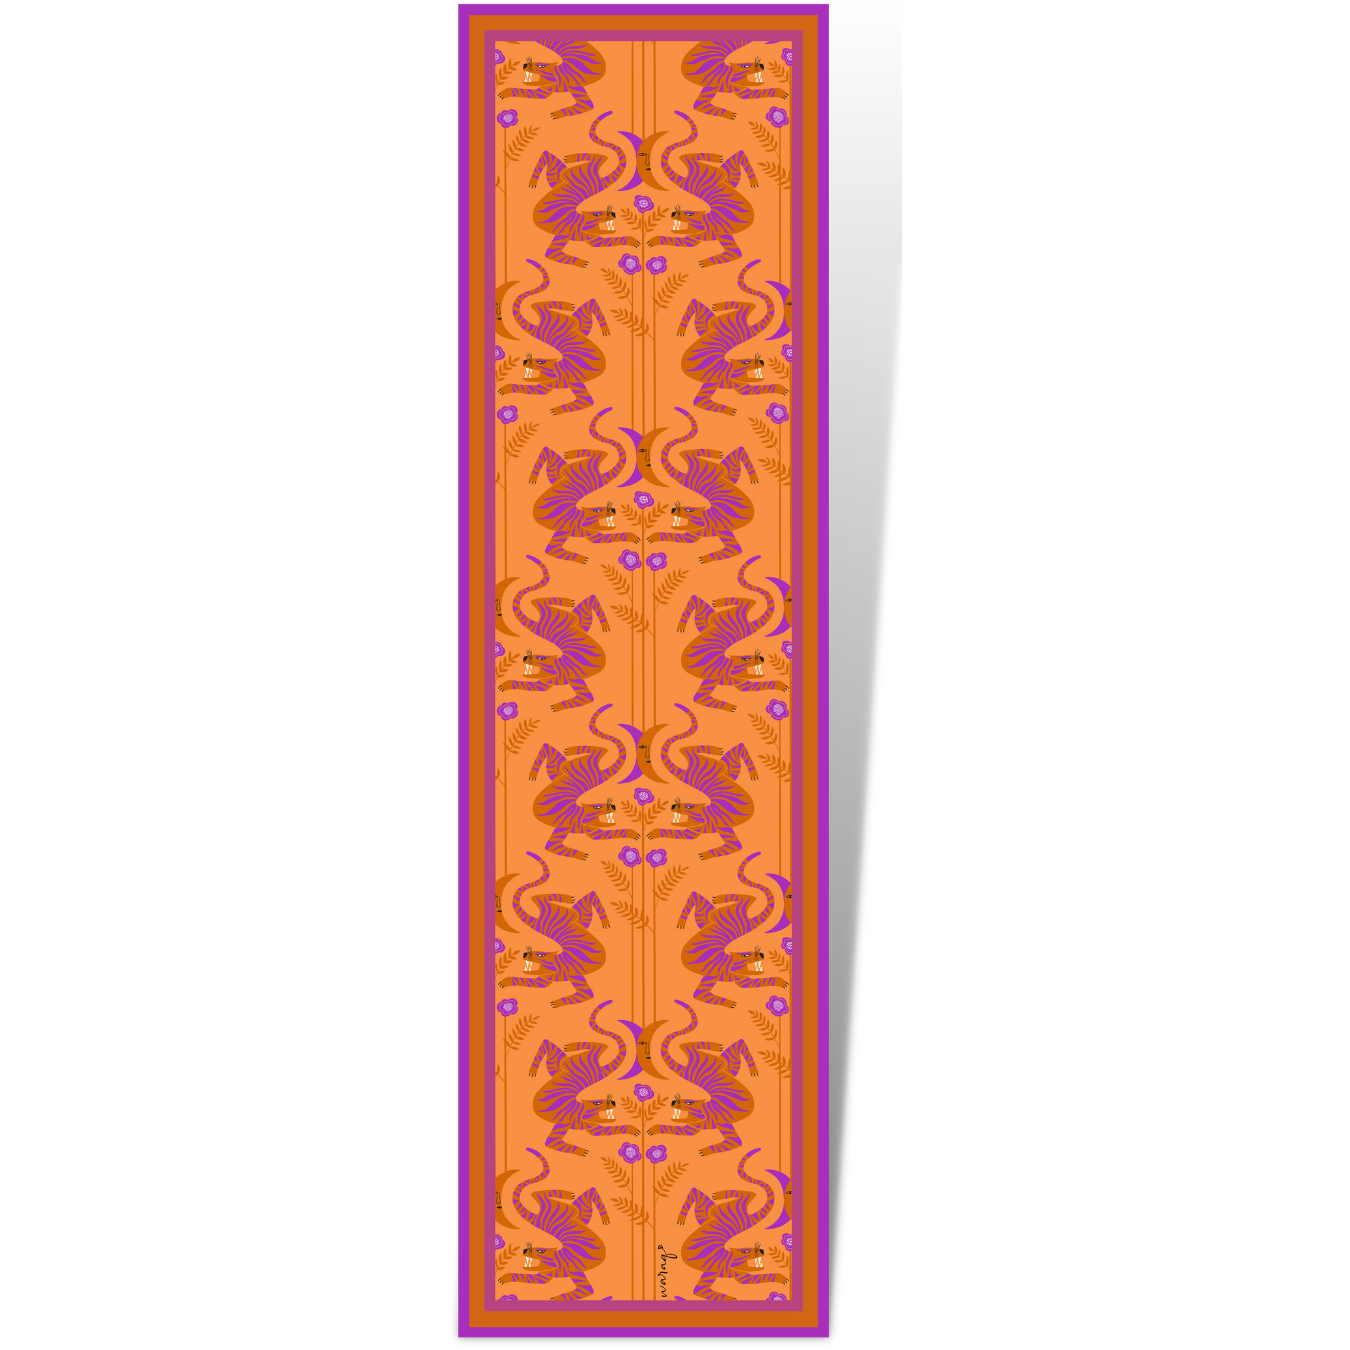 Tangelo Tiger Long Scarf / Stole